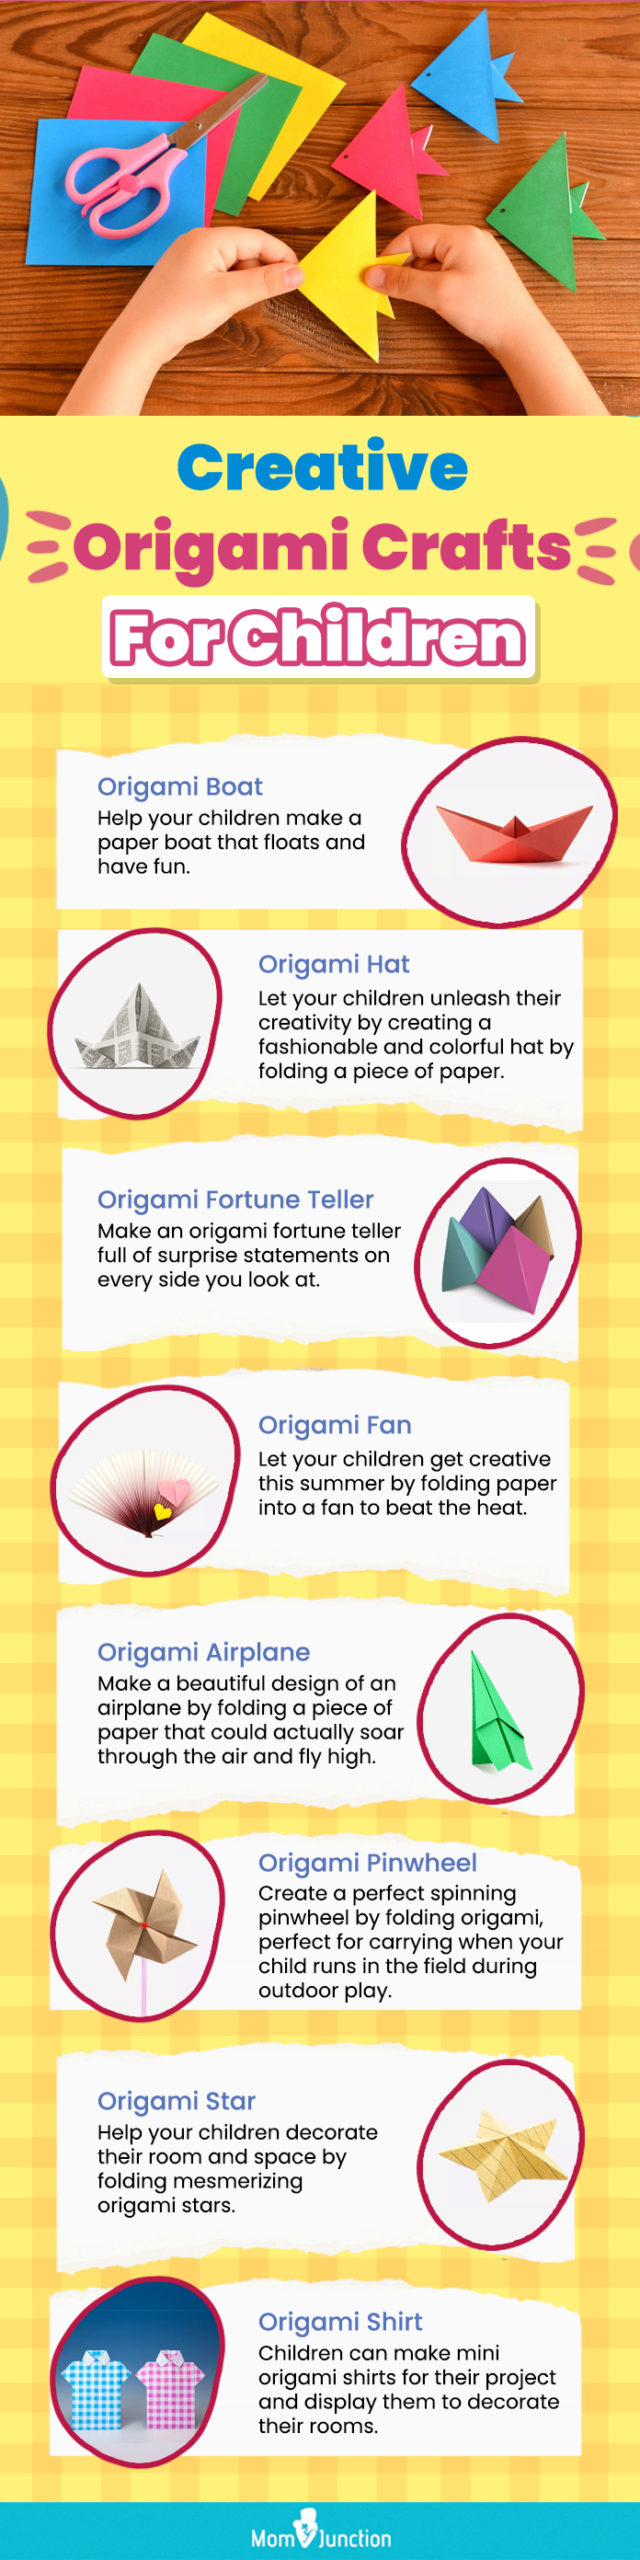 Easy yet beautiful origami paper crafts for kids